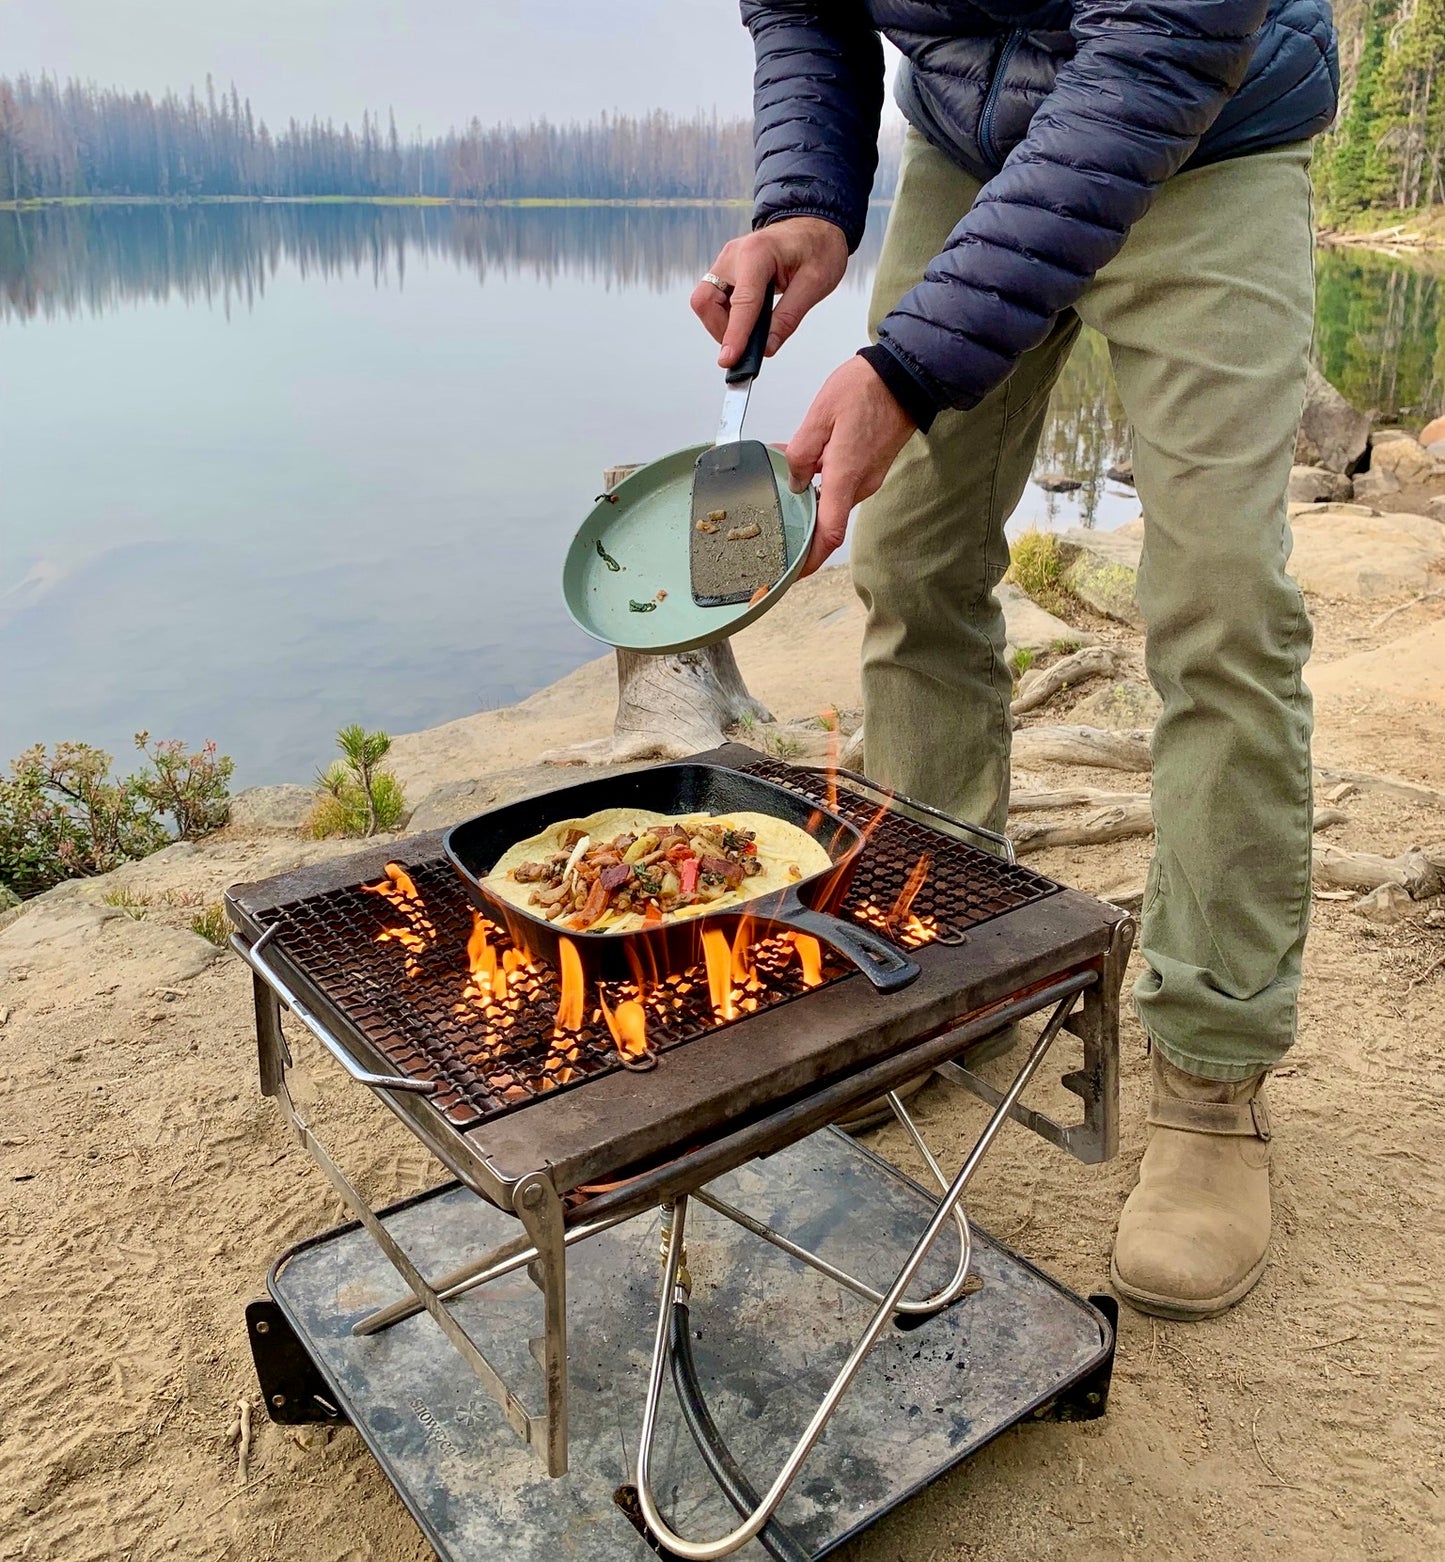 Cooking on the Zutto, a propane adapter for snow peak takibi grill fire pit campfire